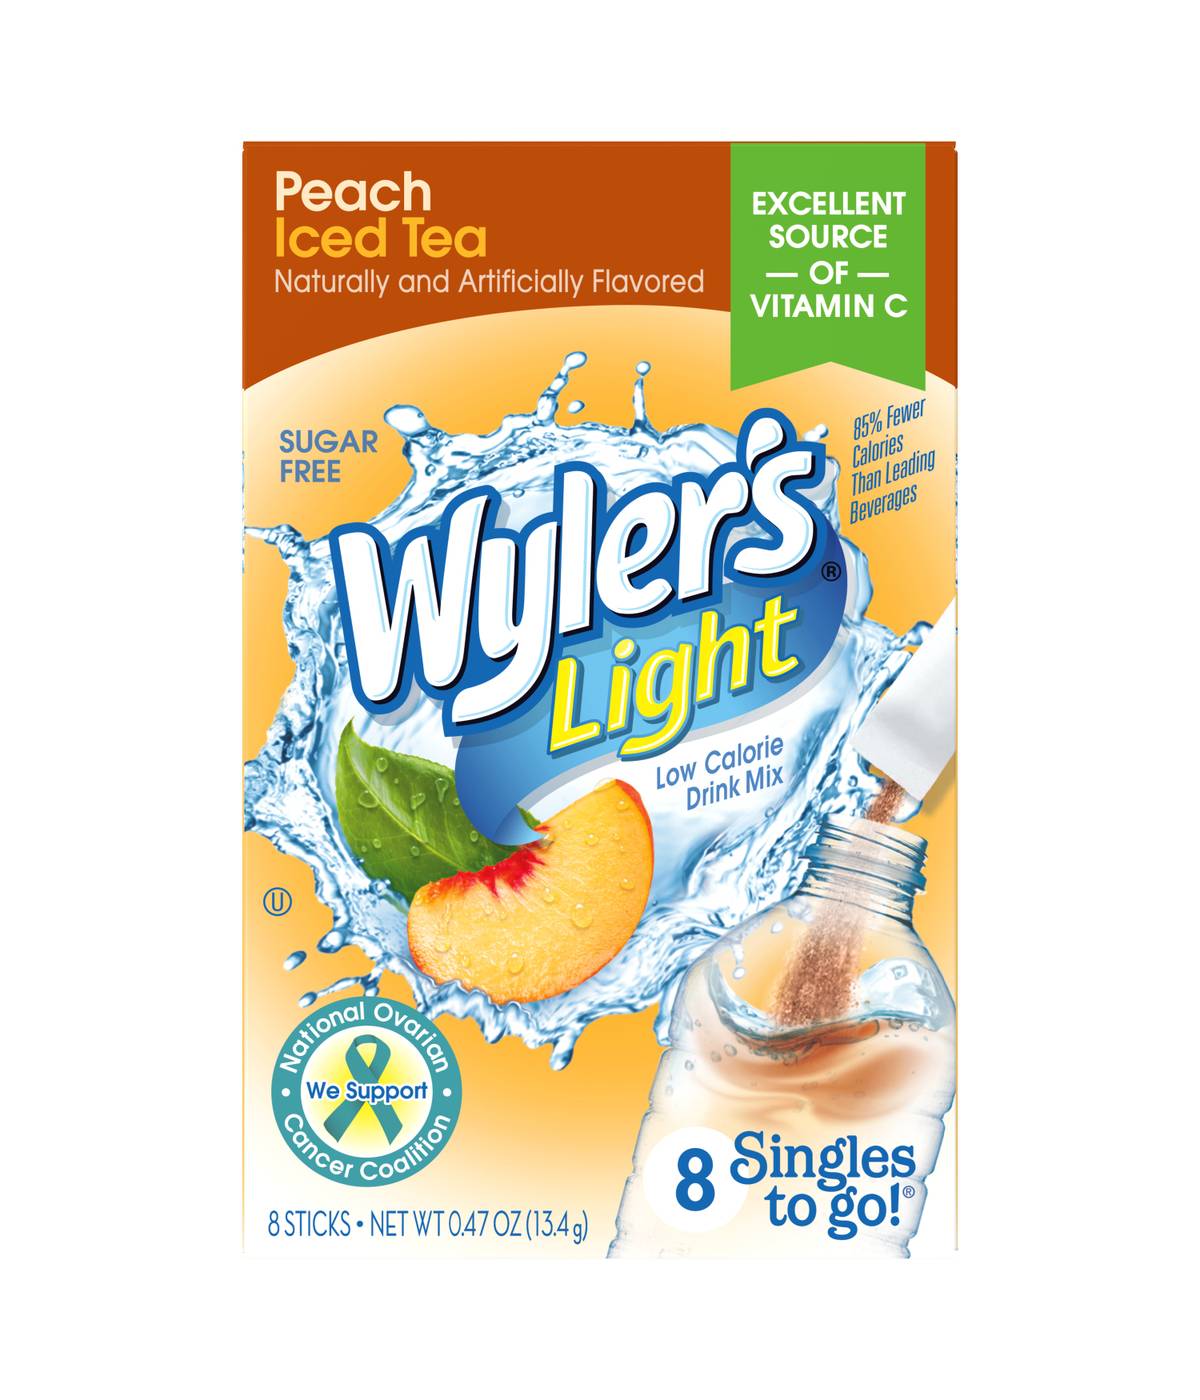 Wyler's Light Singles-To-Go Sugar Free Drink Mix – Peach Iced Tea; image 1 of 3